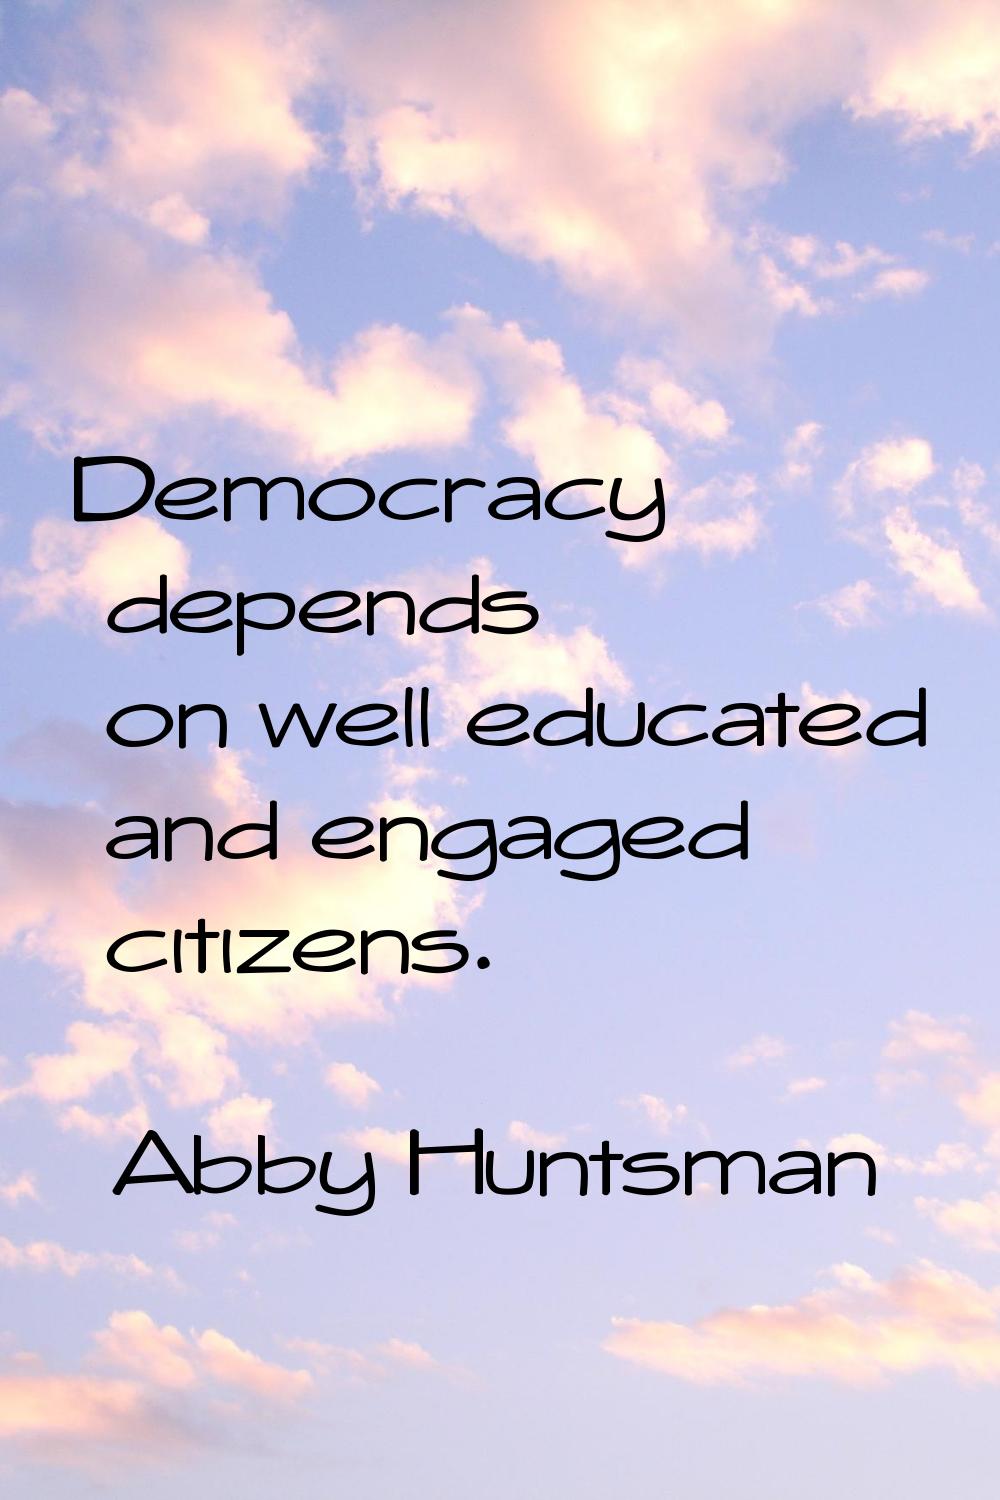 Democracy depends on well educated and engaged citizens.